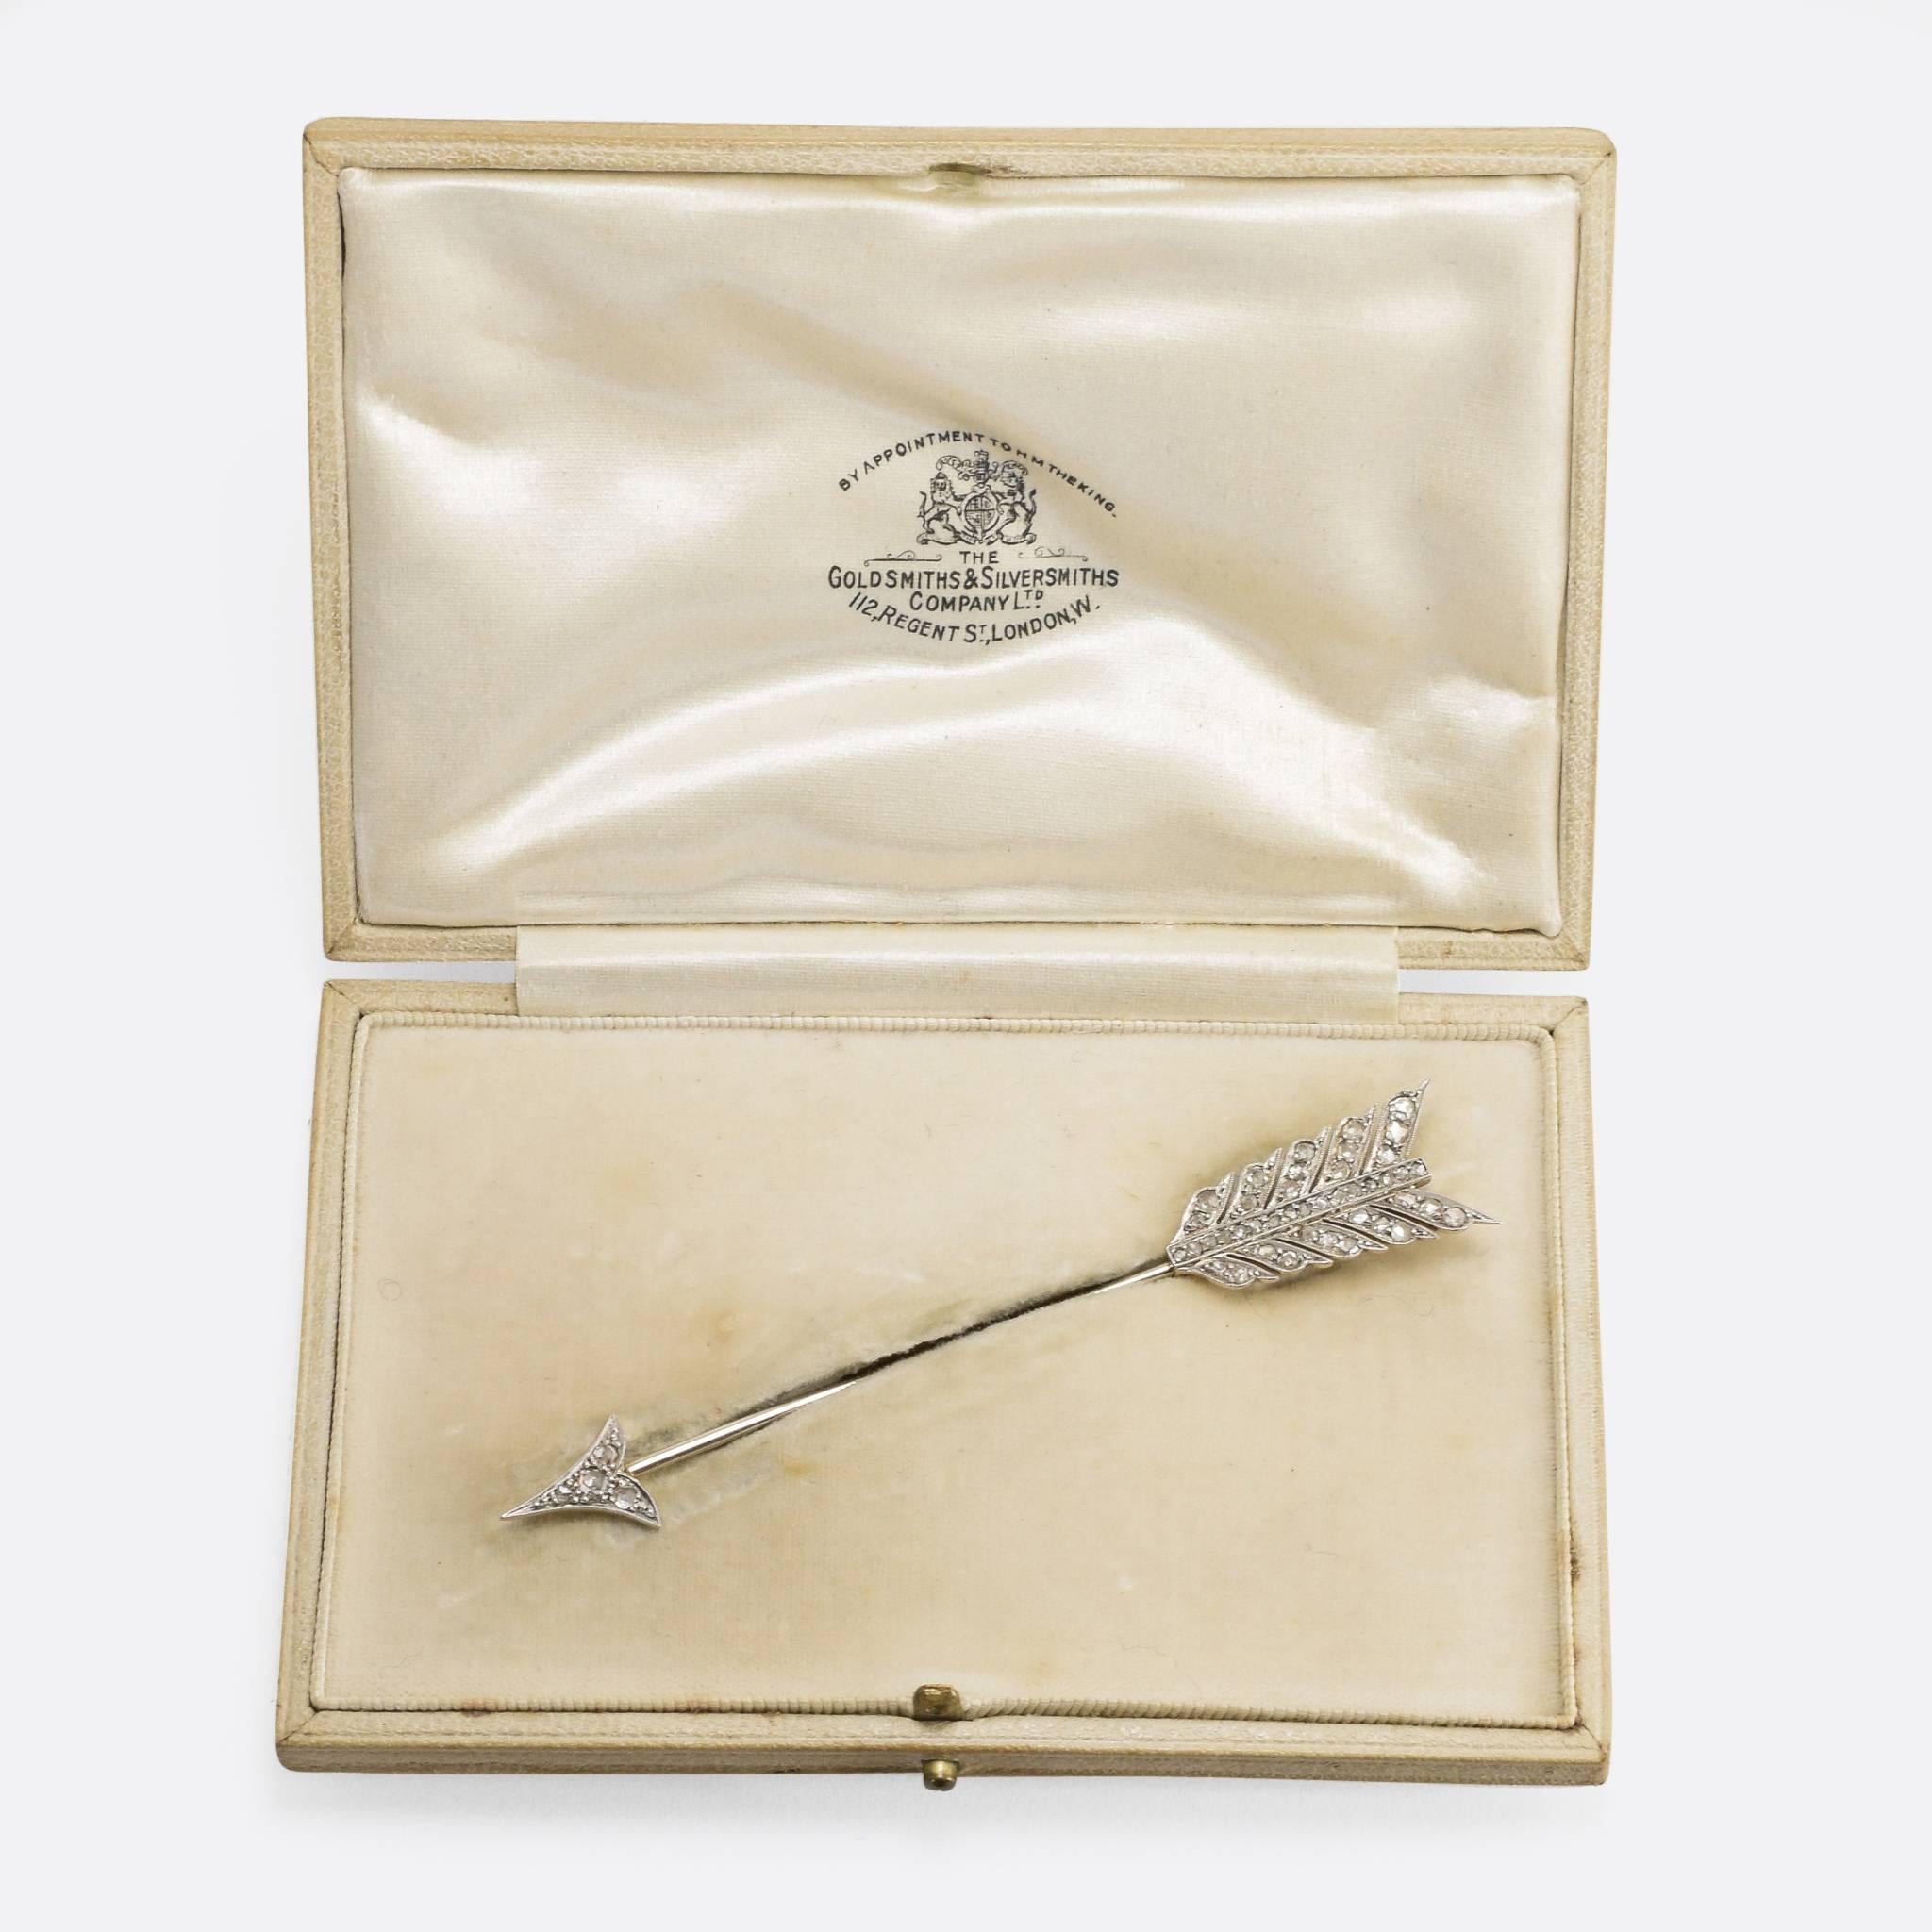 This superb vintage arrow pin brooch is modelled in 18k gold with platinum settings. The head and feathers are set with rose cut diamonds, and finished in fine millegrain. The feathered end can be removed from the shaft of the arrow, in order to